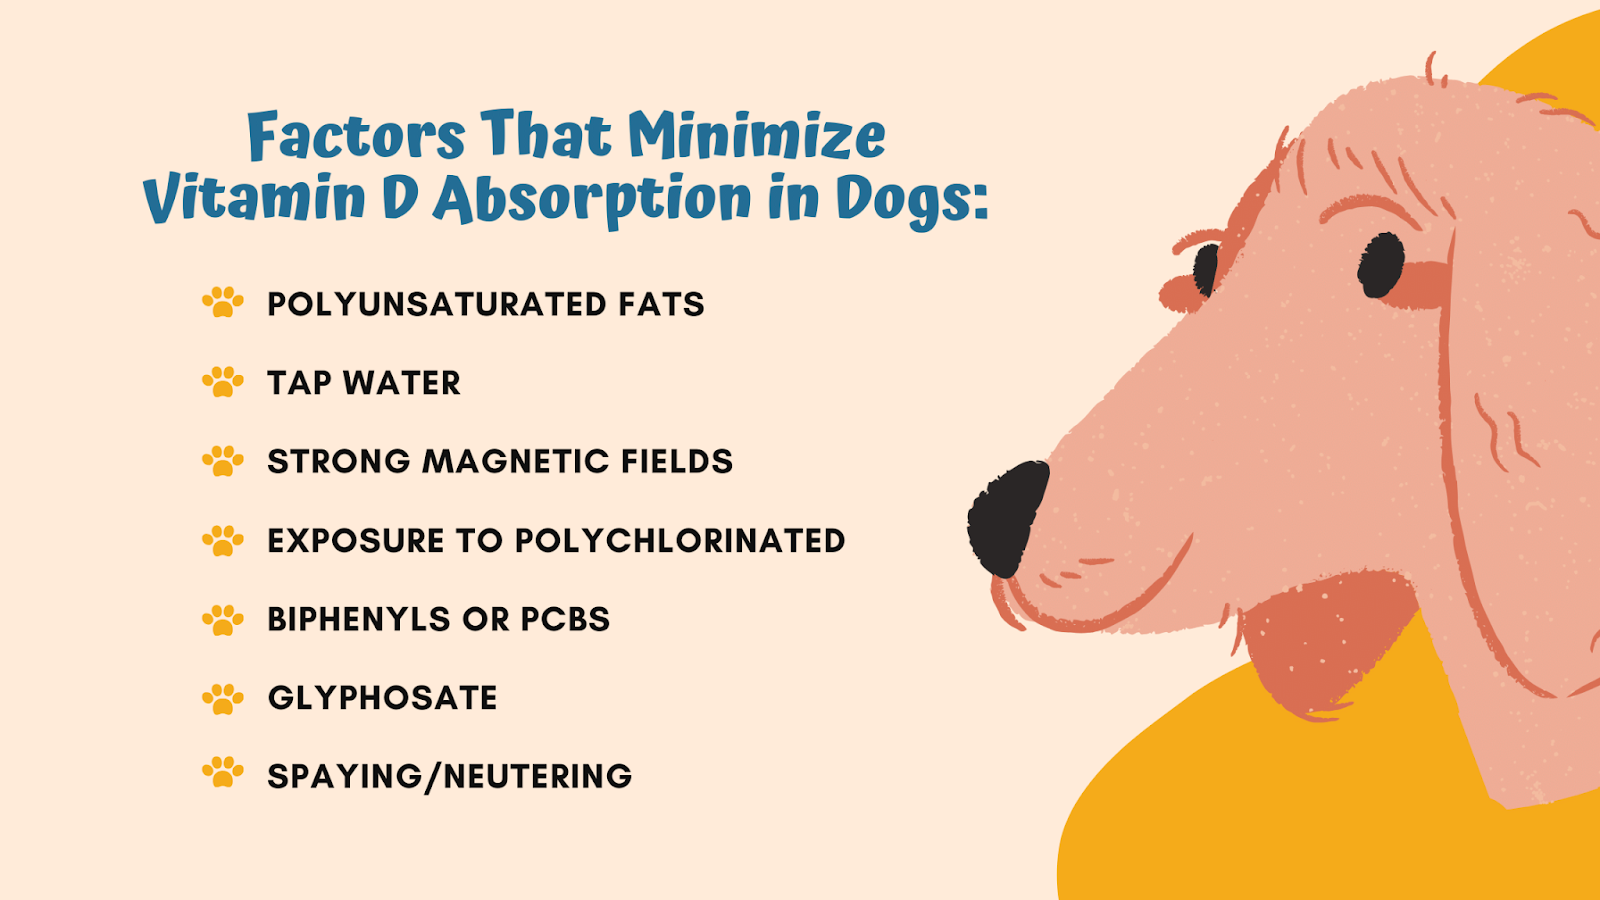 Vitamin D absorption in dogs